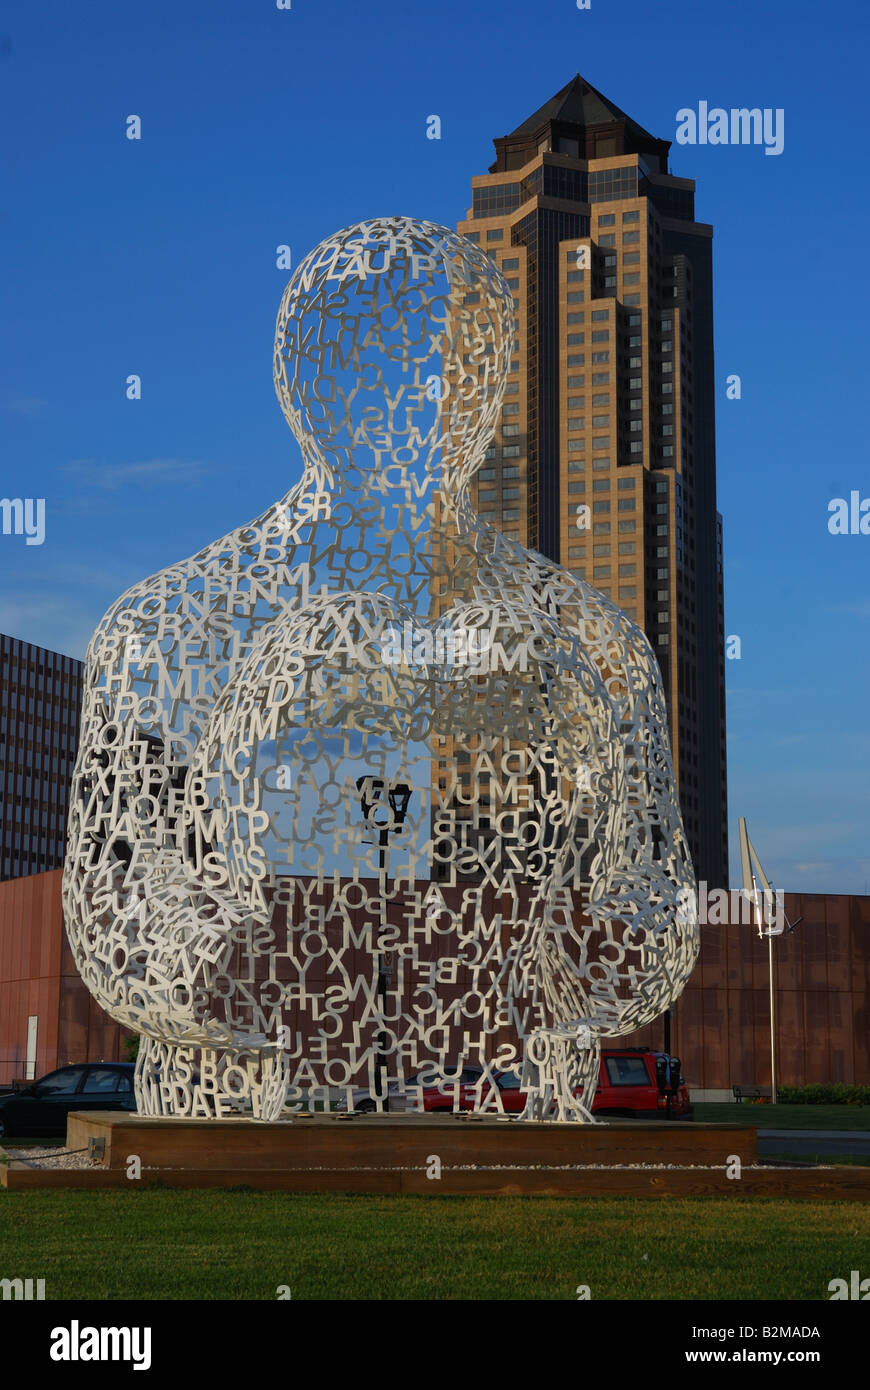 Nomade Sculpture by Jaume Plensa located in downtown Des Moines Iowa  Gateway Park next to the John and Mary Pappajohn Center. Stock Photo